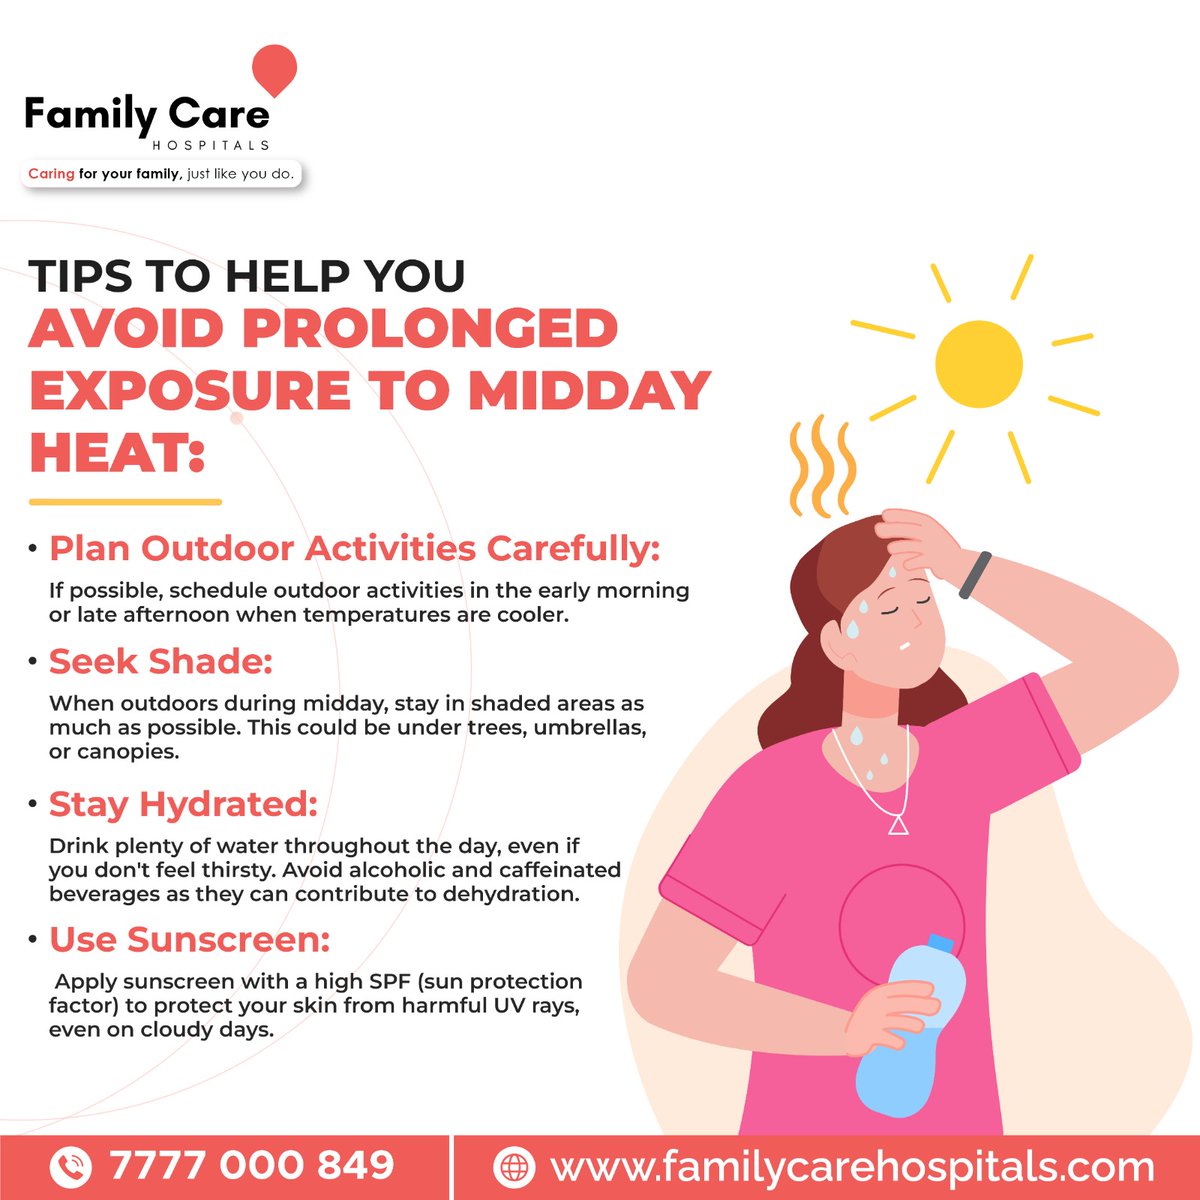 By following these tips, you can help avoid prolonged exposure to midday heat and reduce your risk of heat-related illnesses.

#FCH #Familycare #FamilyCareHospitals #HeatSafety #StayCool #BeatTheHeat #HeatAwareness #HeatWave #SunSafety #StayHydrated